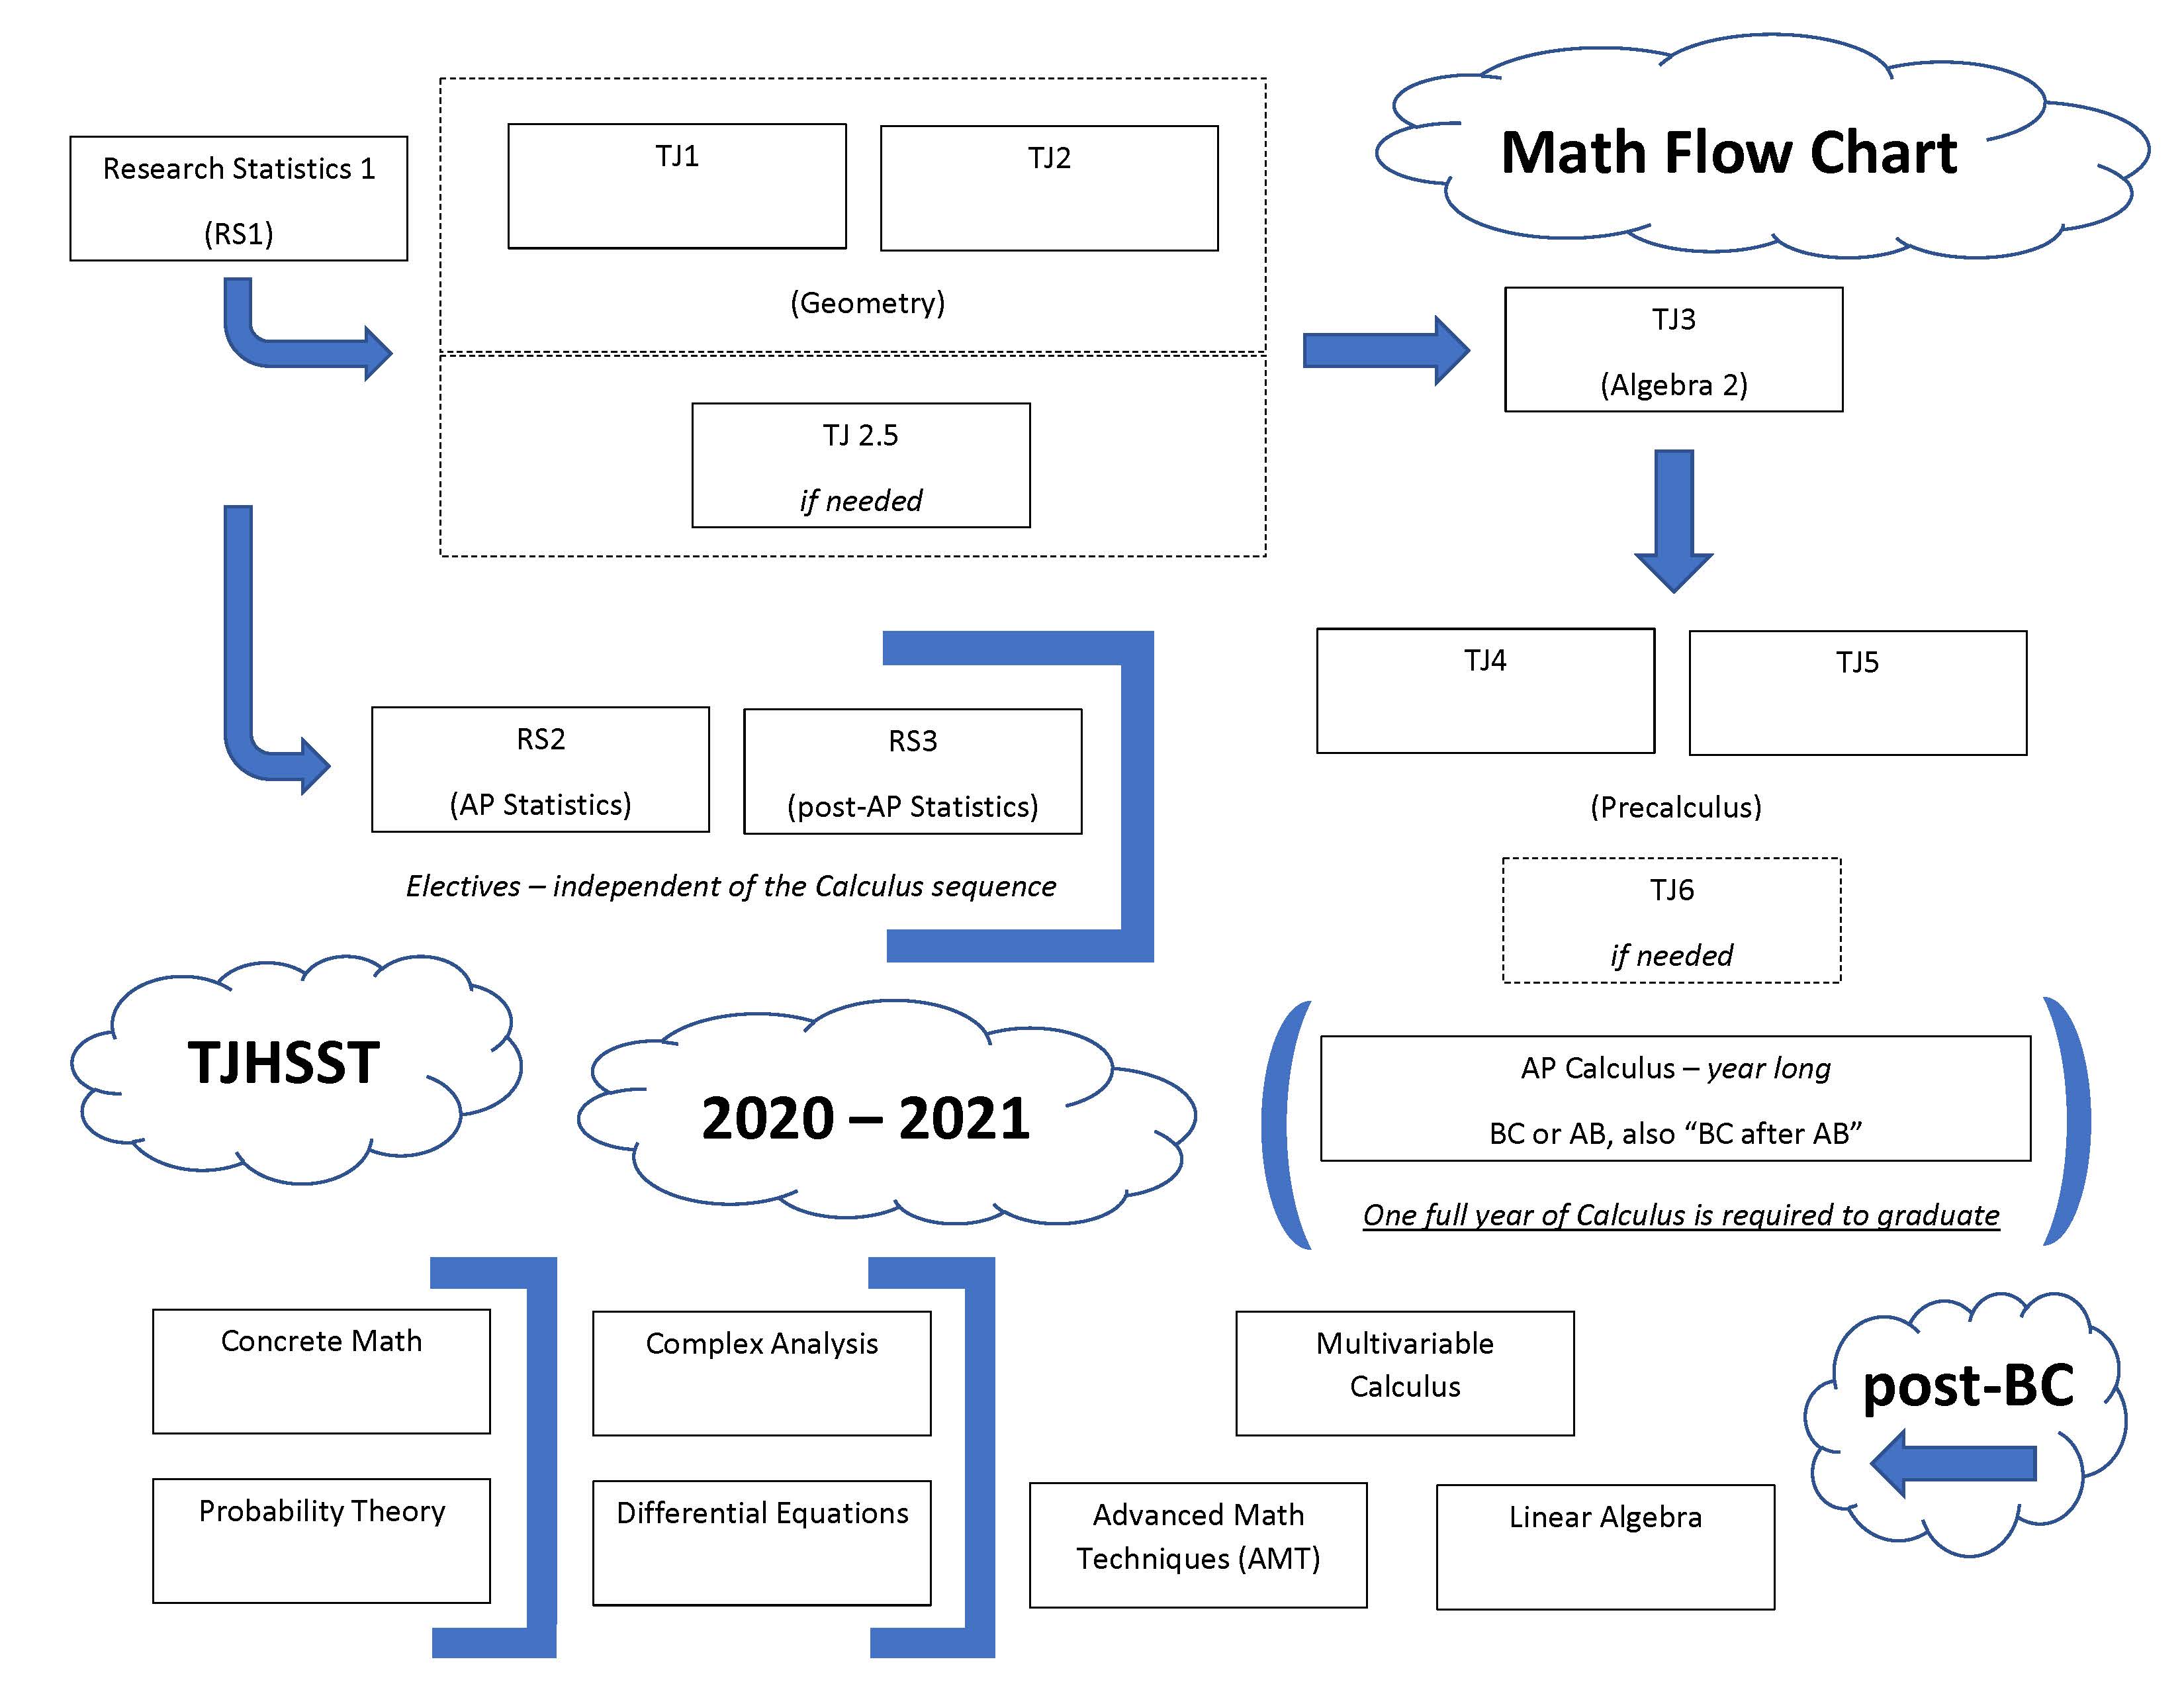 Flow Chart Of Math Courses At TJHSST Thomas Jefferson High School For Science And Technology